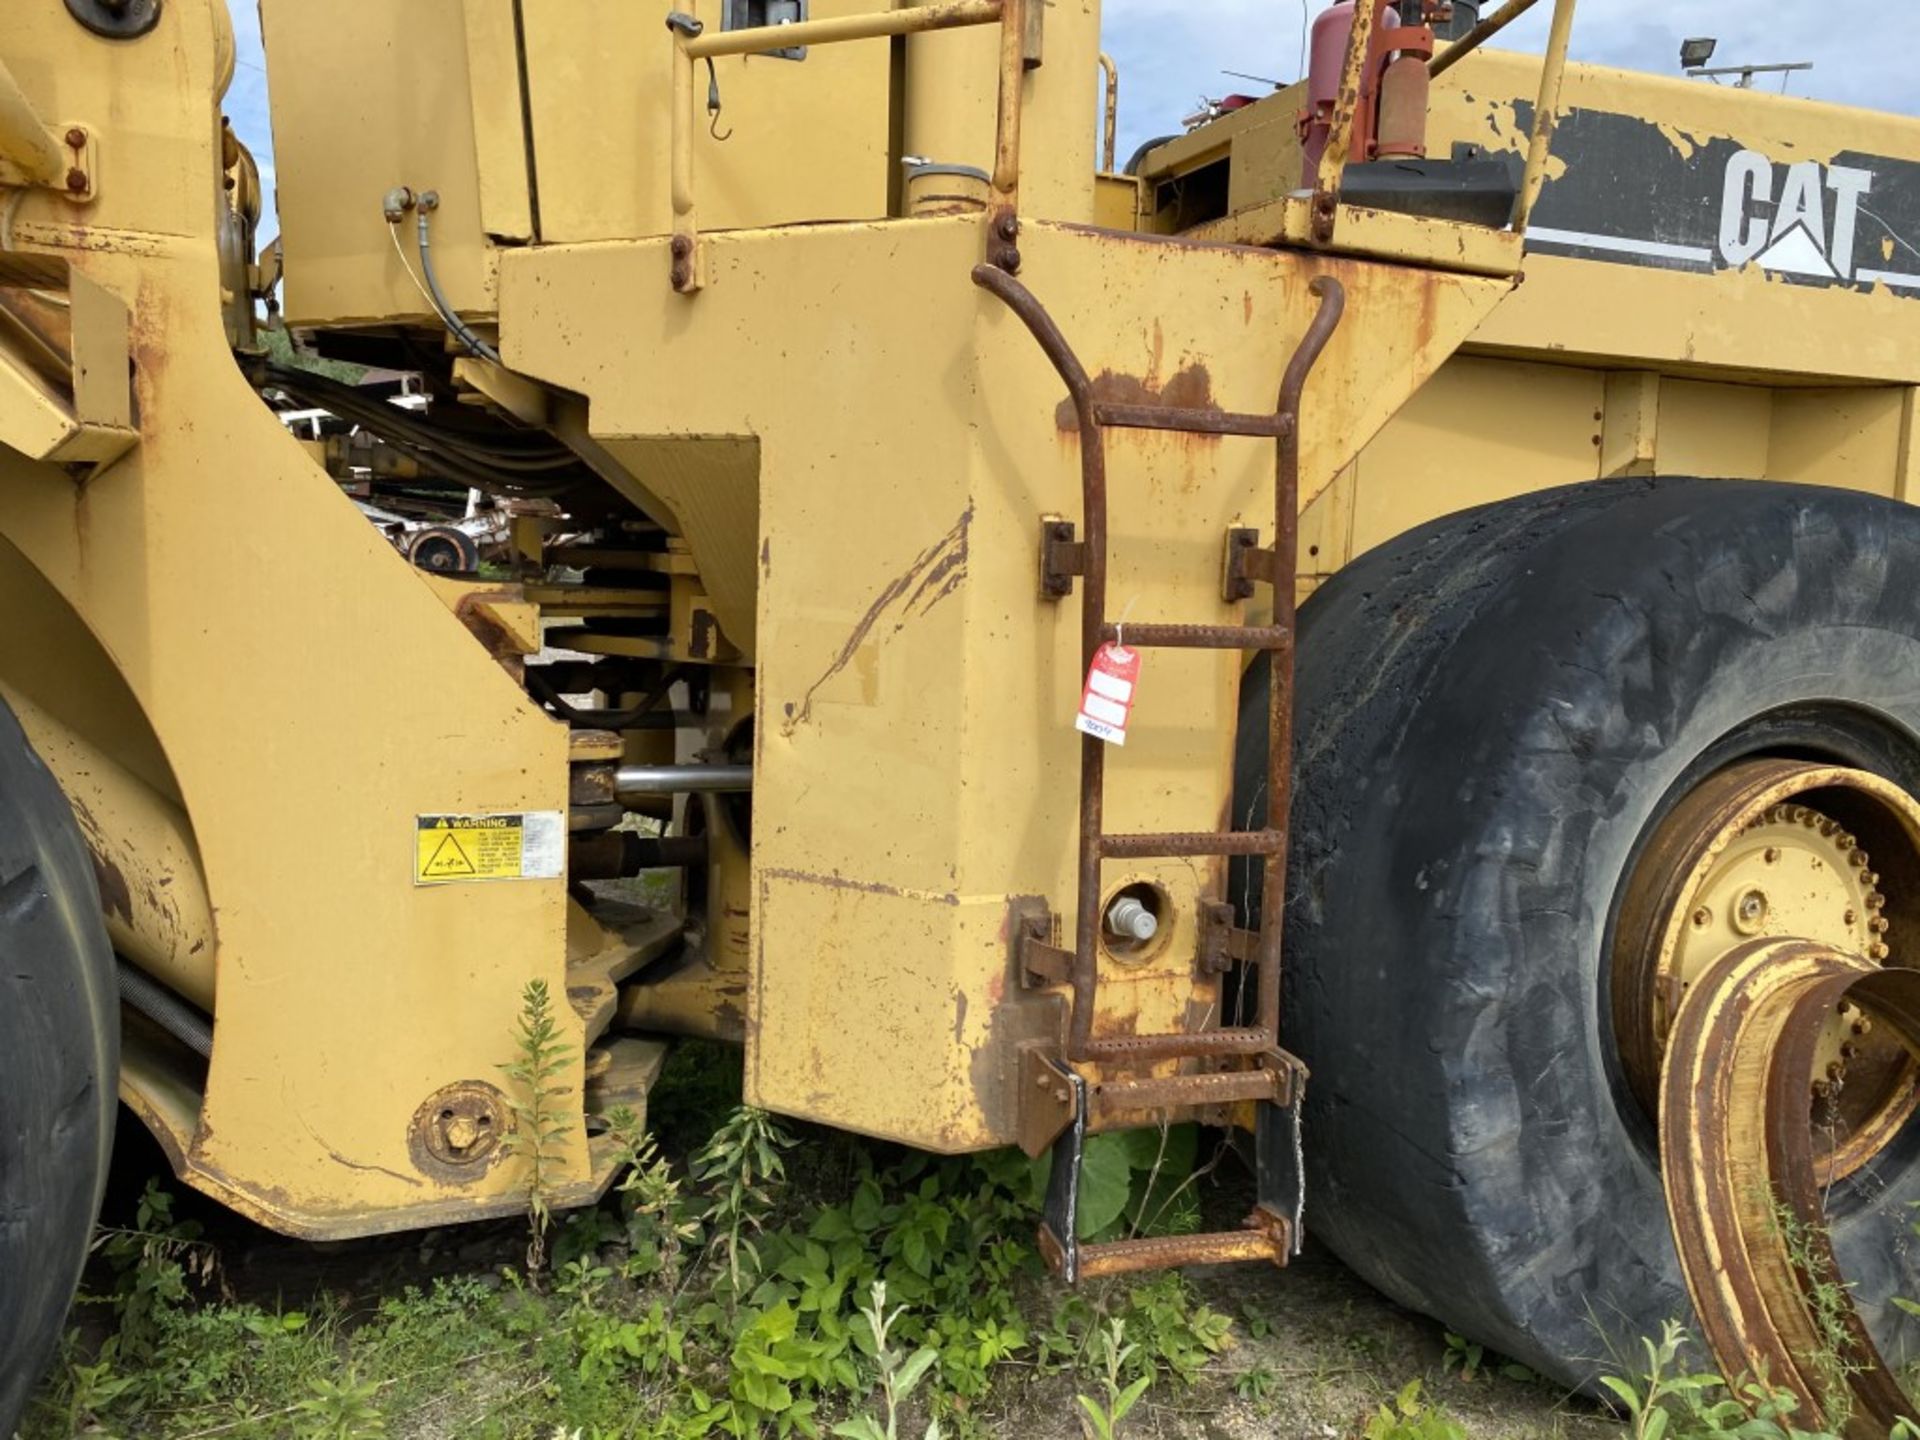 1998 CATERPILLAR 988F ARTICULATED WHEEL LOADER, ENCLOSED CAB, S/N: 8Y601152, 39,457 HOURS, PARTS - Image 10 of 18